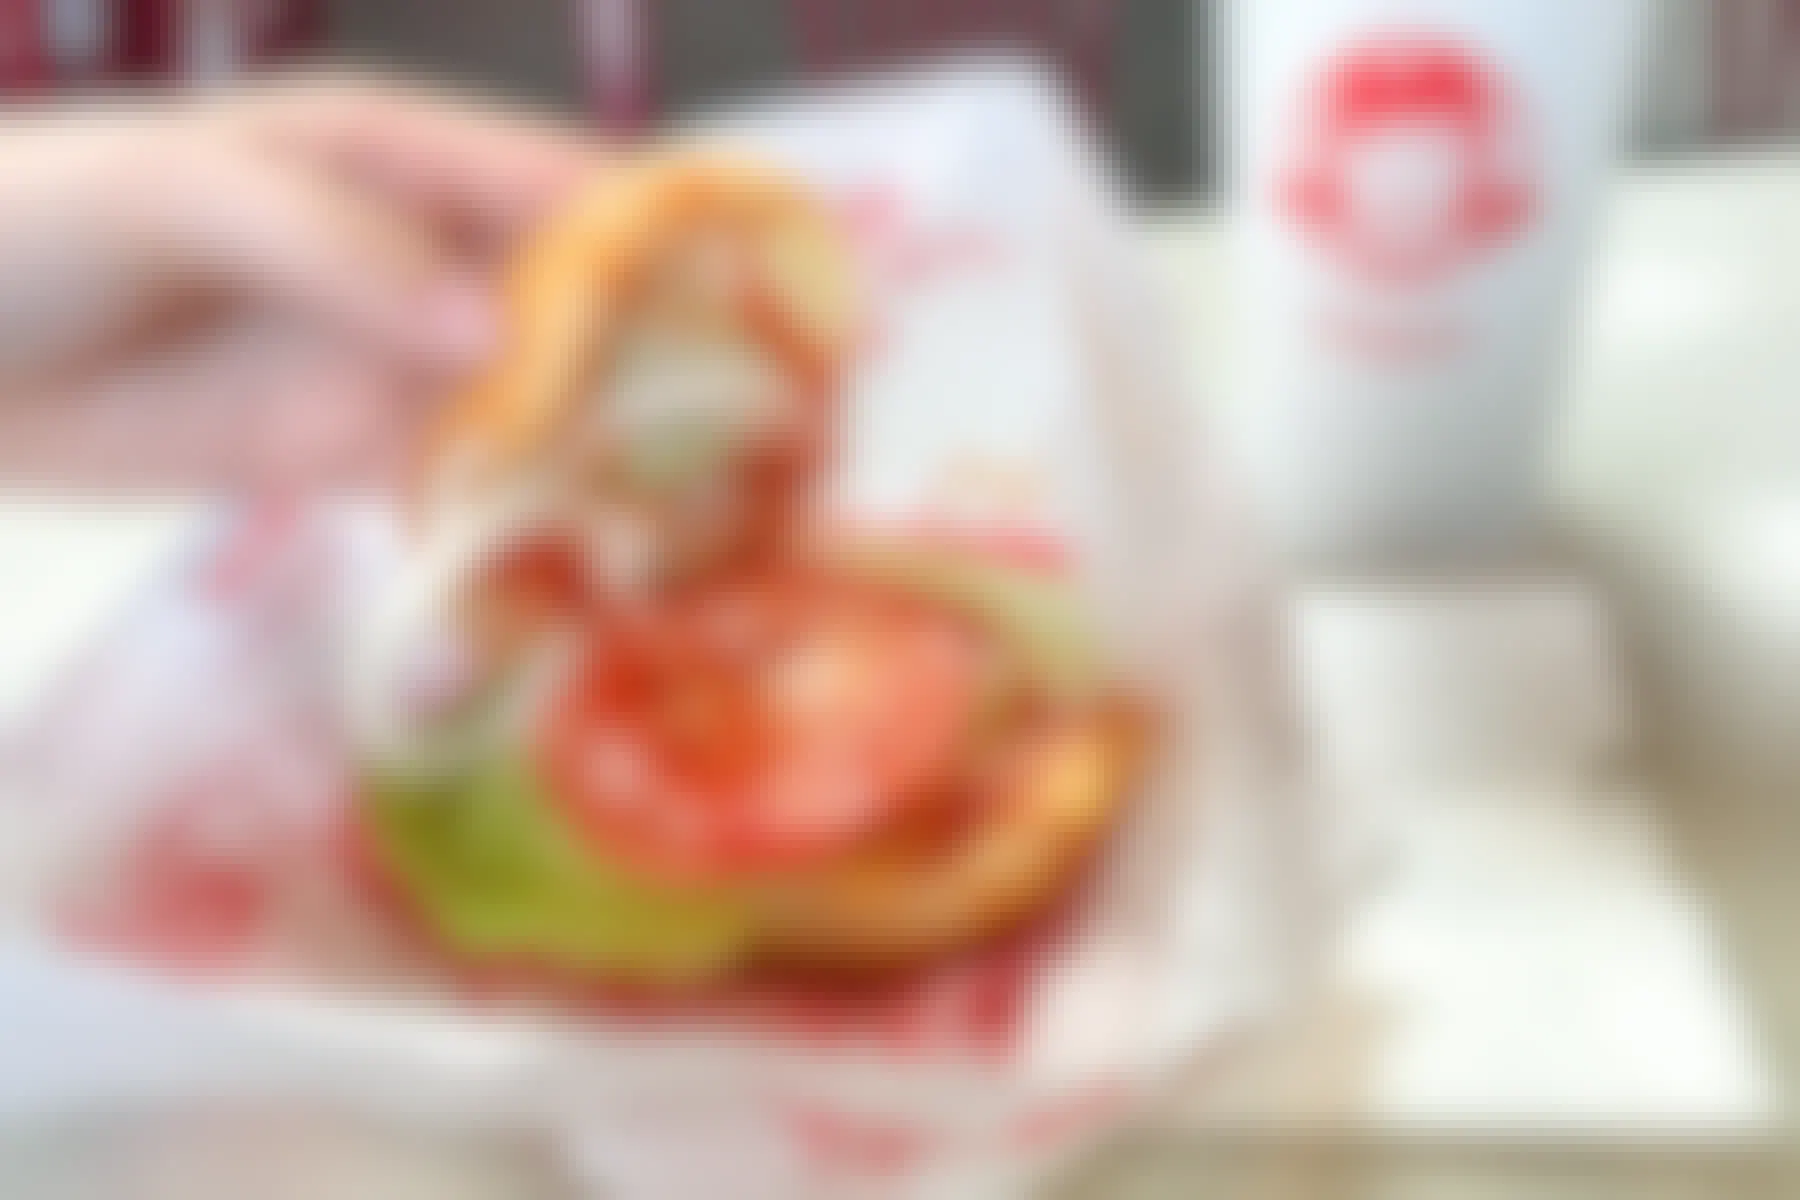 A person's hand lifting the top bun off of a meatless Wendy's sandwich sitting on a paper wrapper next to a Wendy's drink cup.